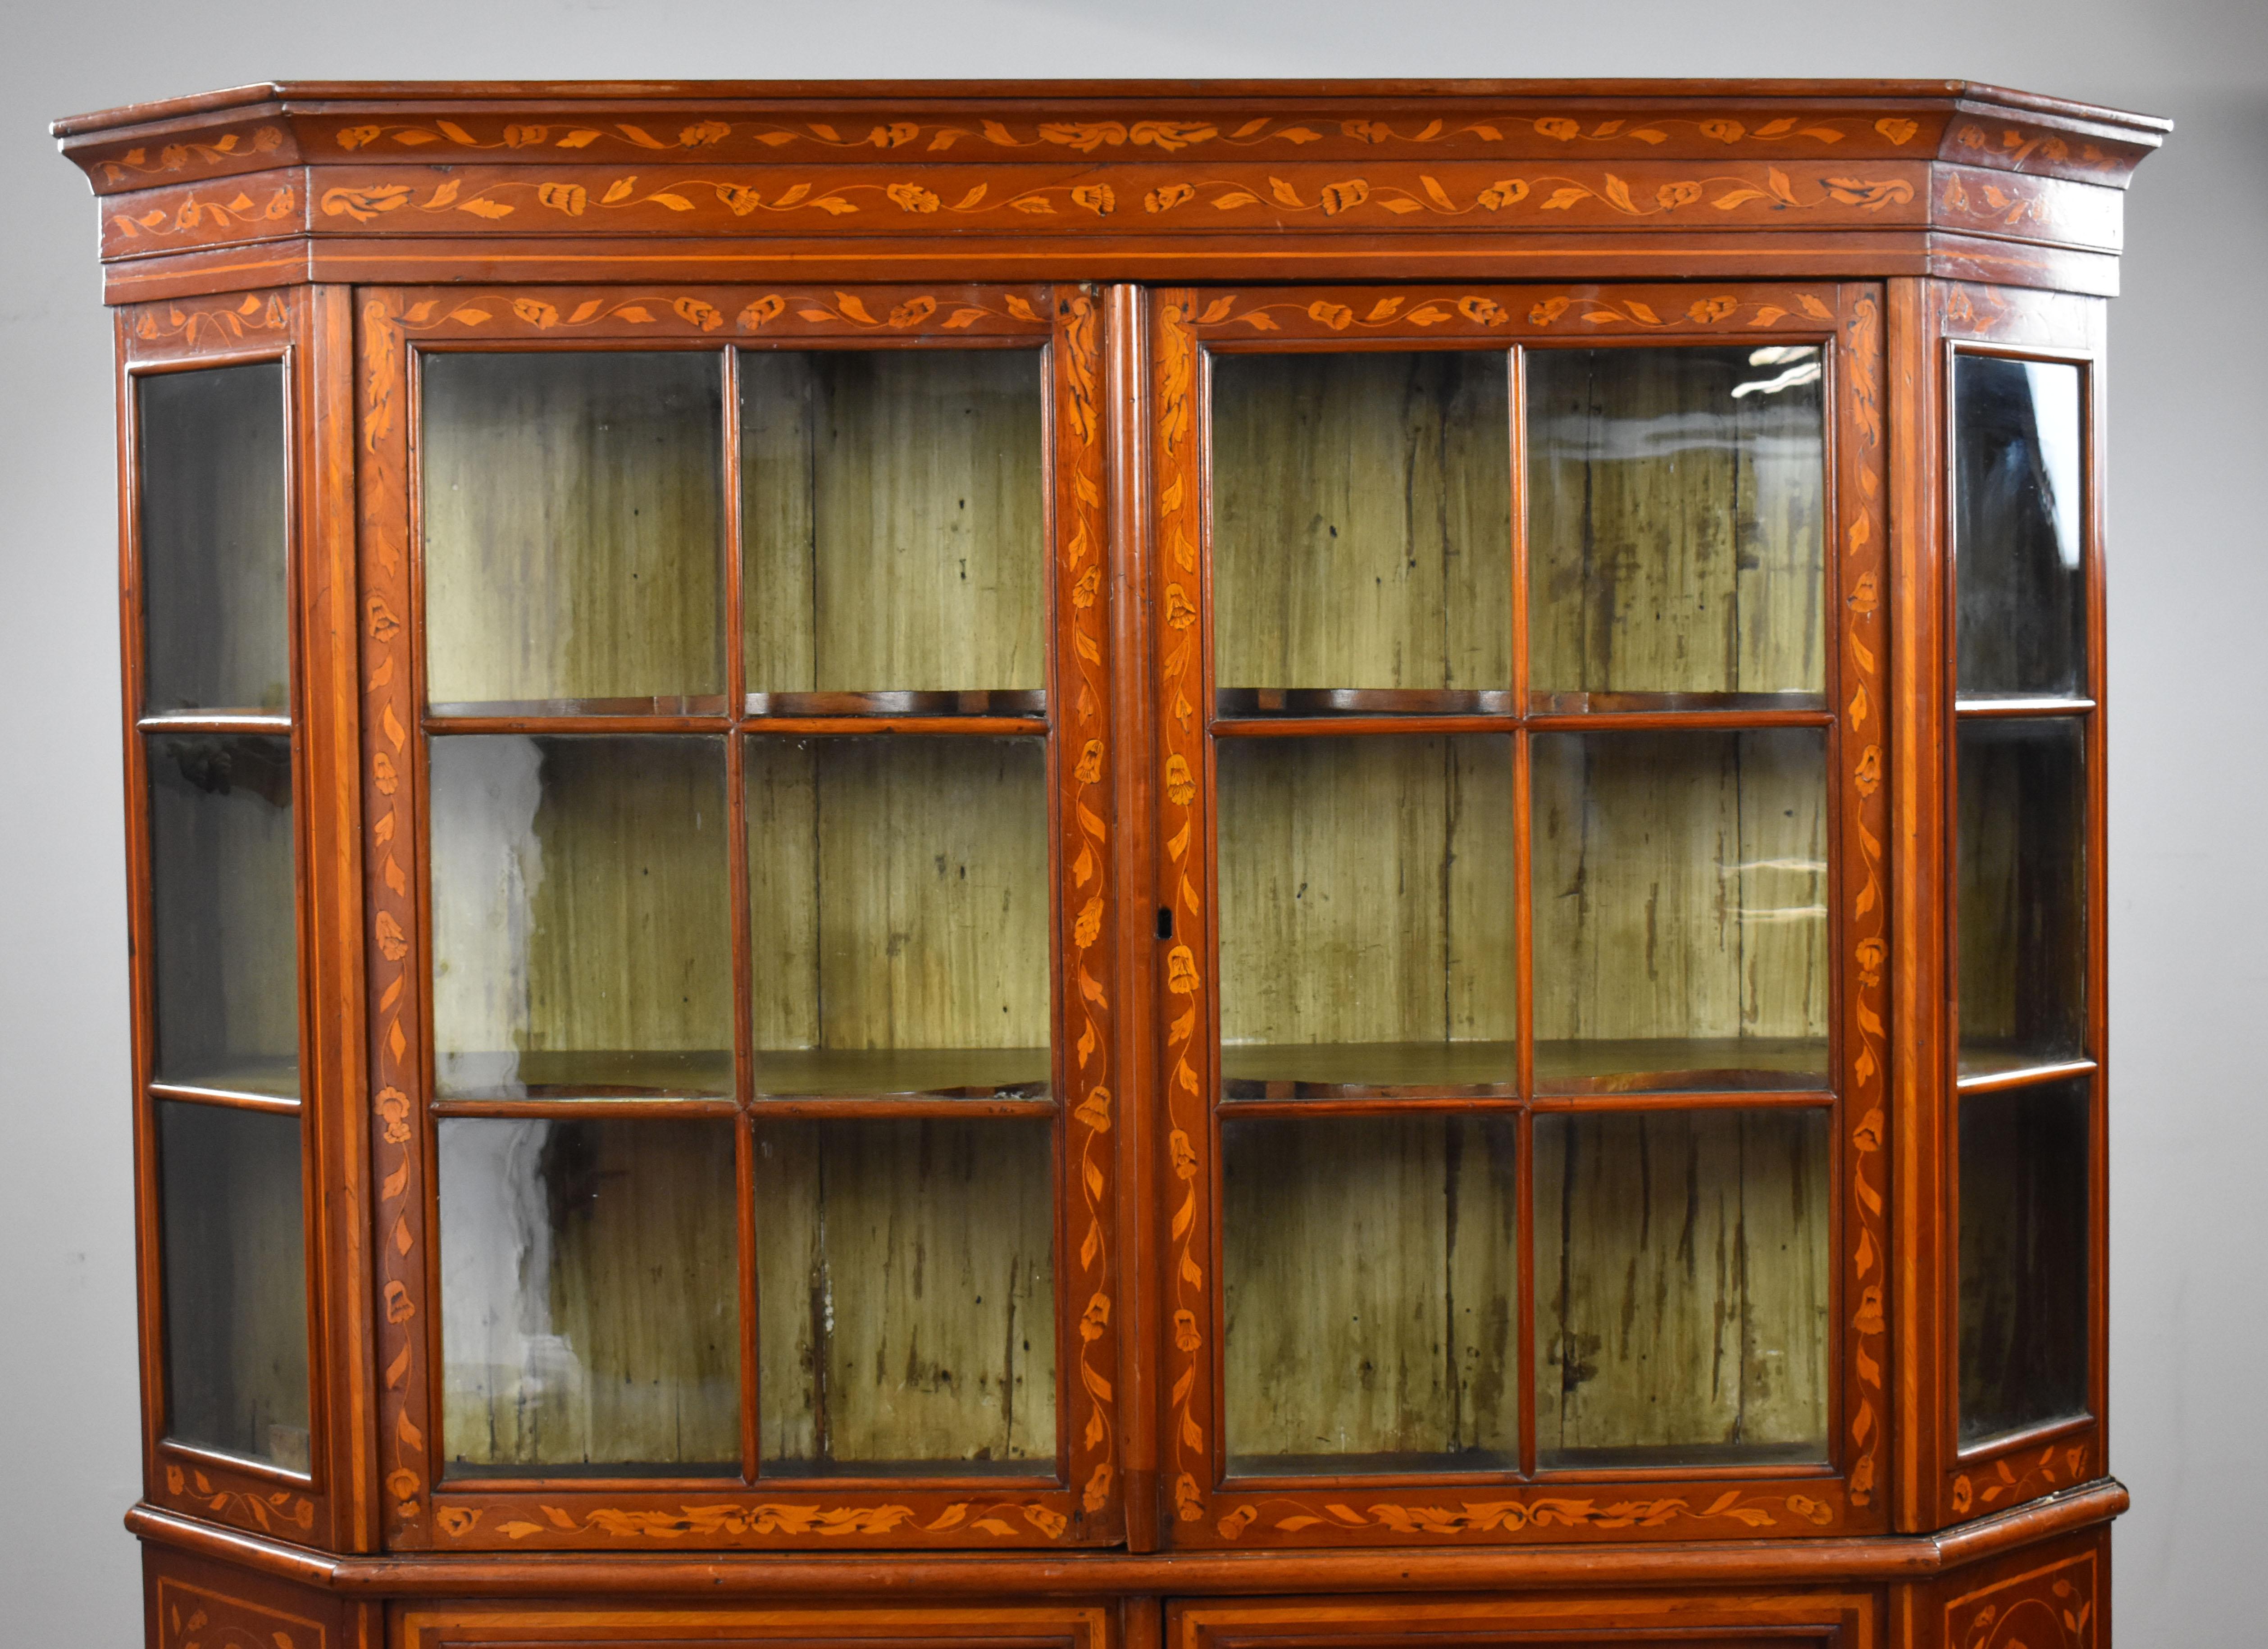 For sale is a 19th century walnut Dutch marquetry display cabinet, having two glazed doors enclosing shaped shelves, with two cupboard doors below, raised on bun feet. The cabinet is profusely inlaid throughout and is in good condition, showing